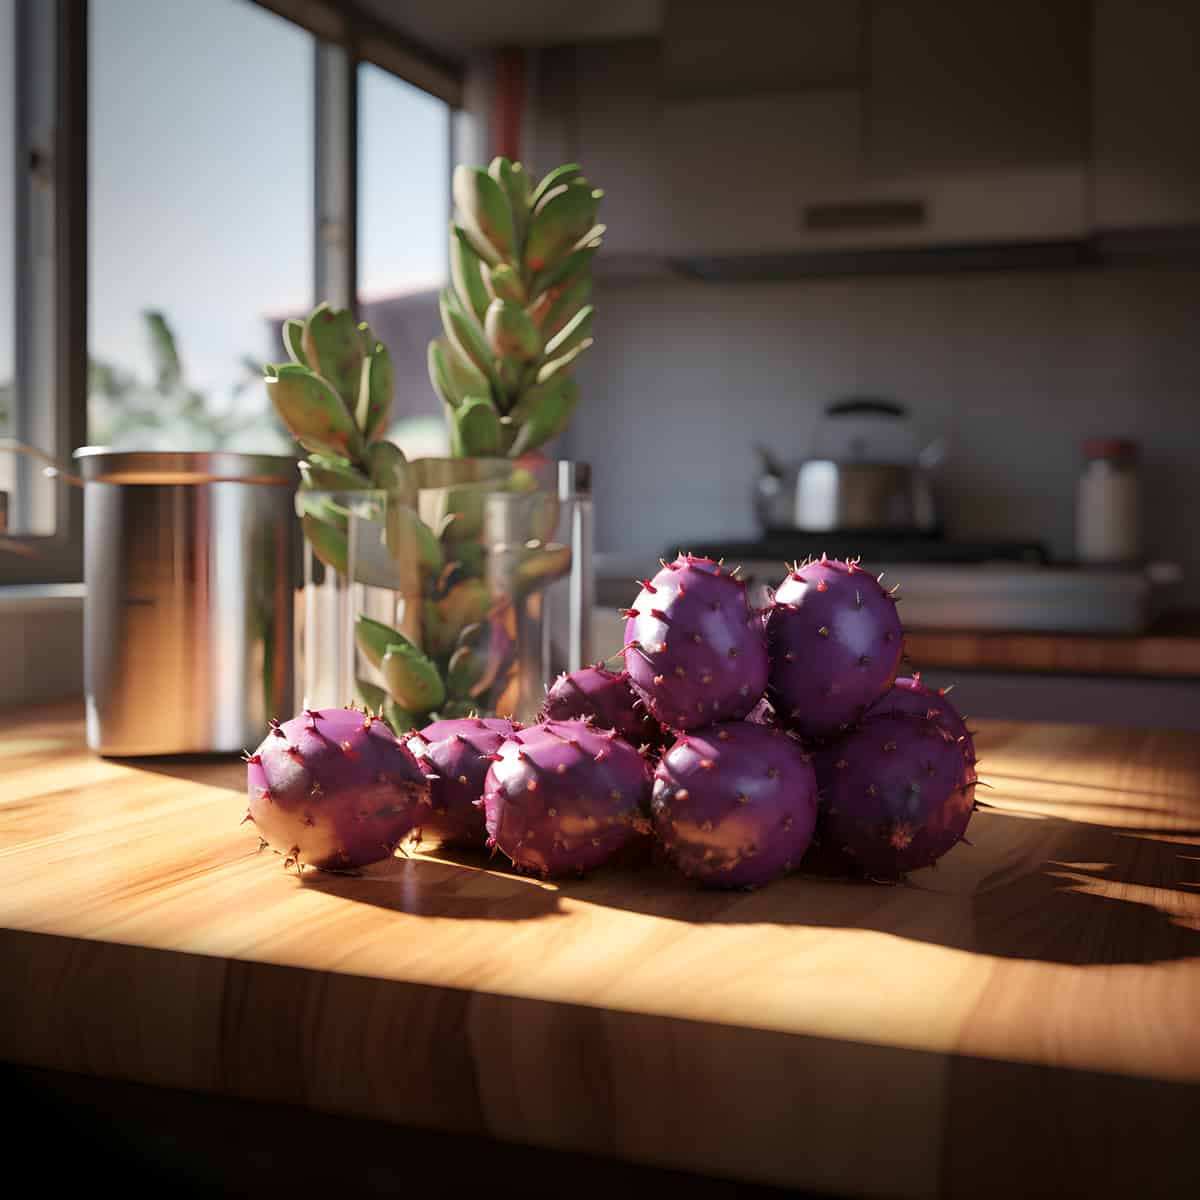 Bilberry Cactus Fruit on a kitchen counter